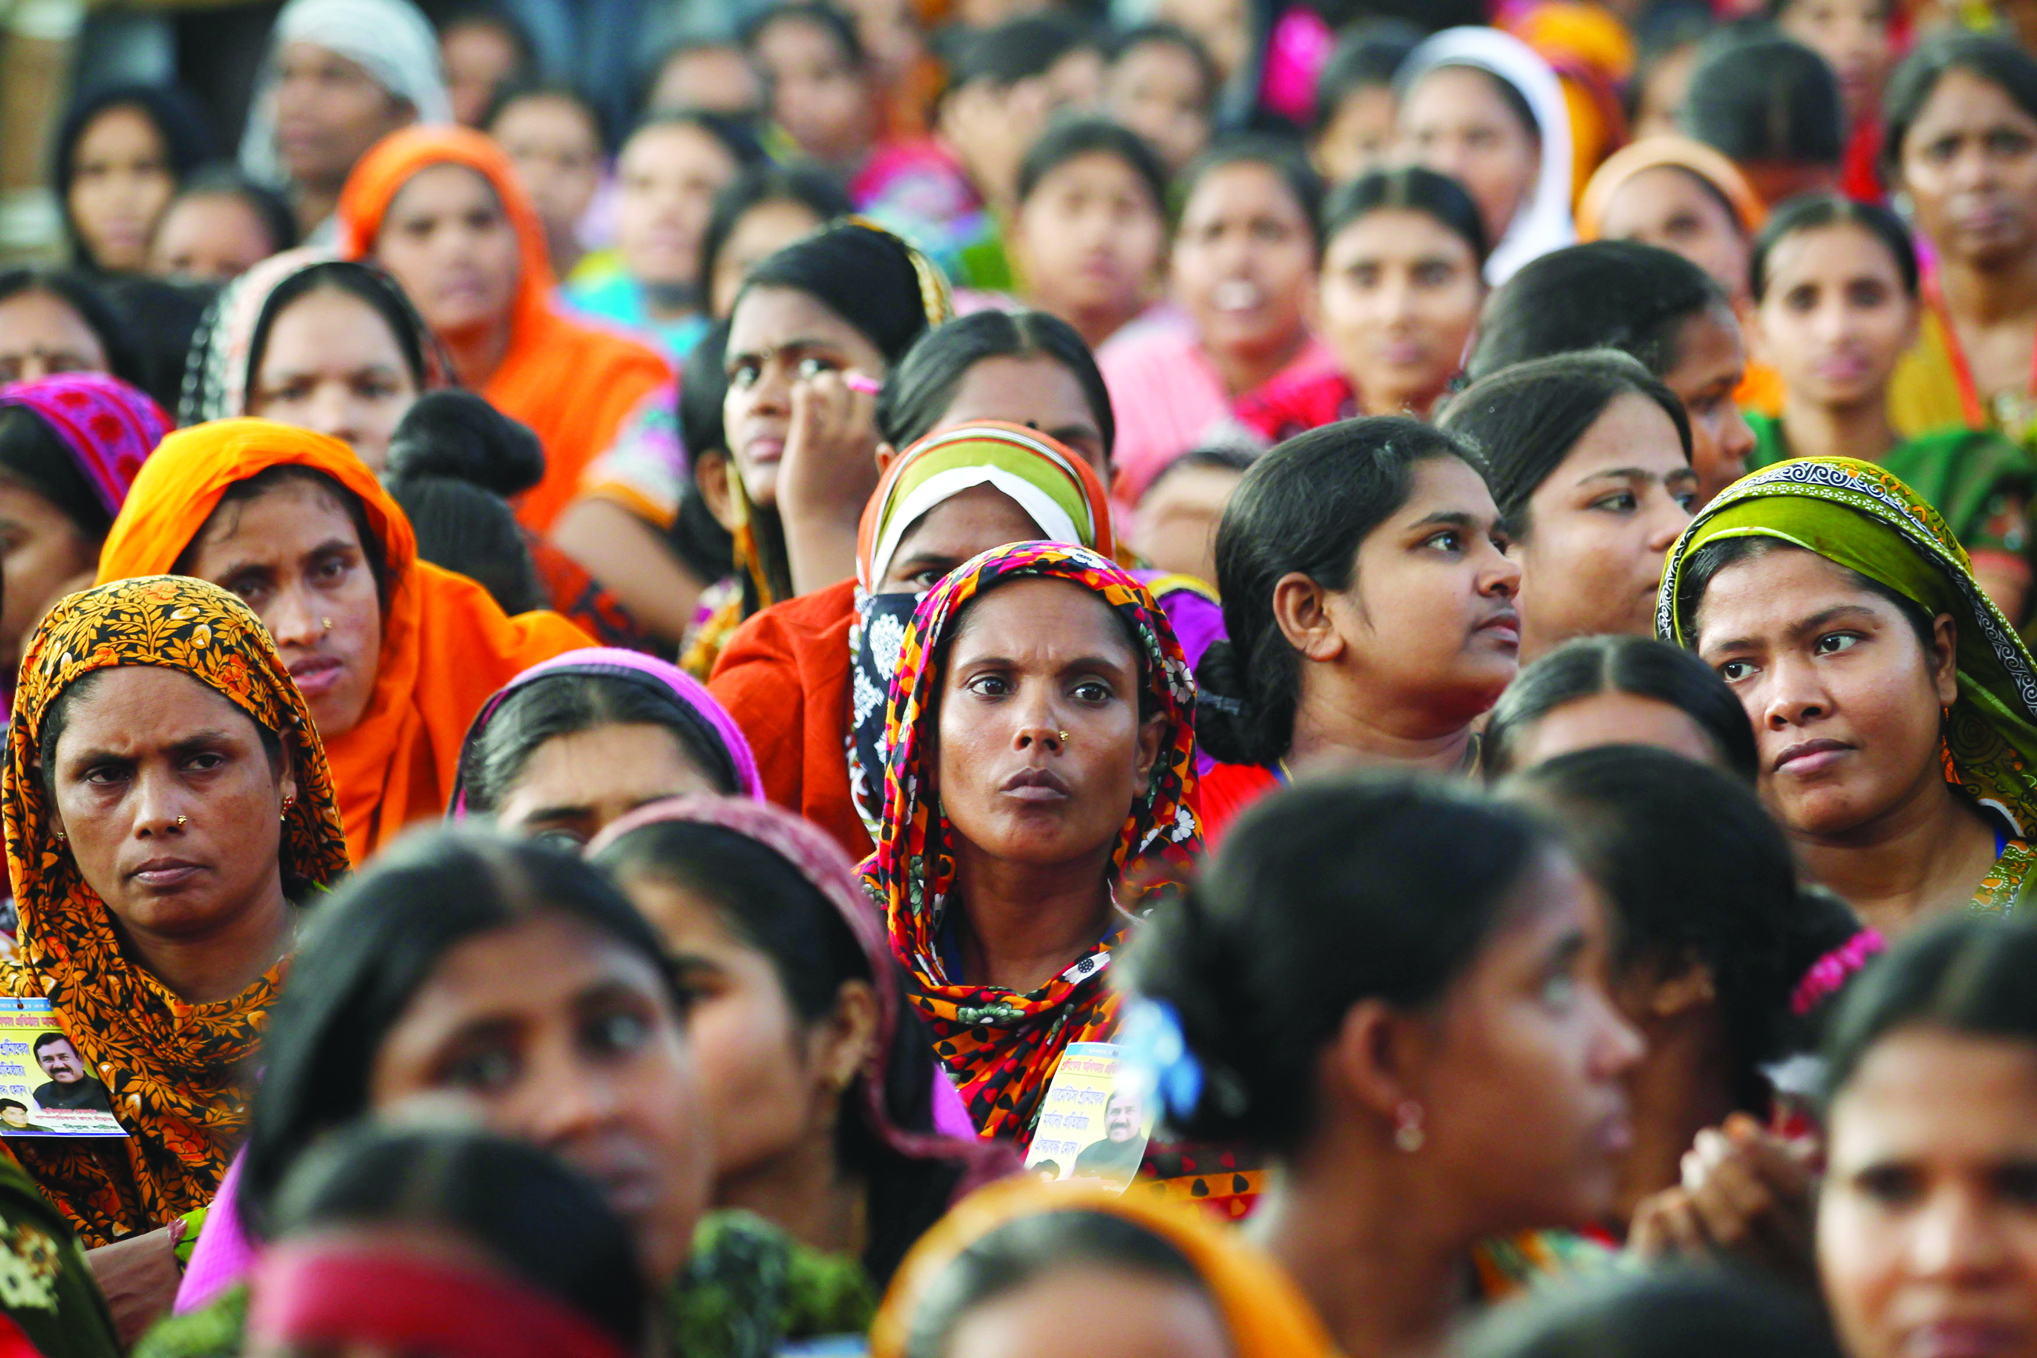 Garment workers listen to speakers during a rally demanding an increase to their minimum wage in Dhaka September 21, 2013. EUTERS/Andrew Biraj